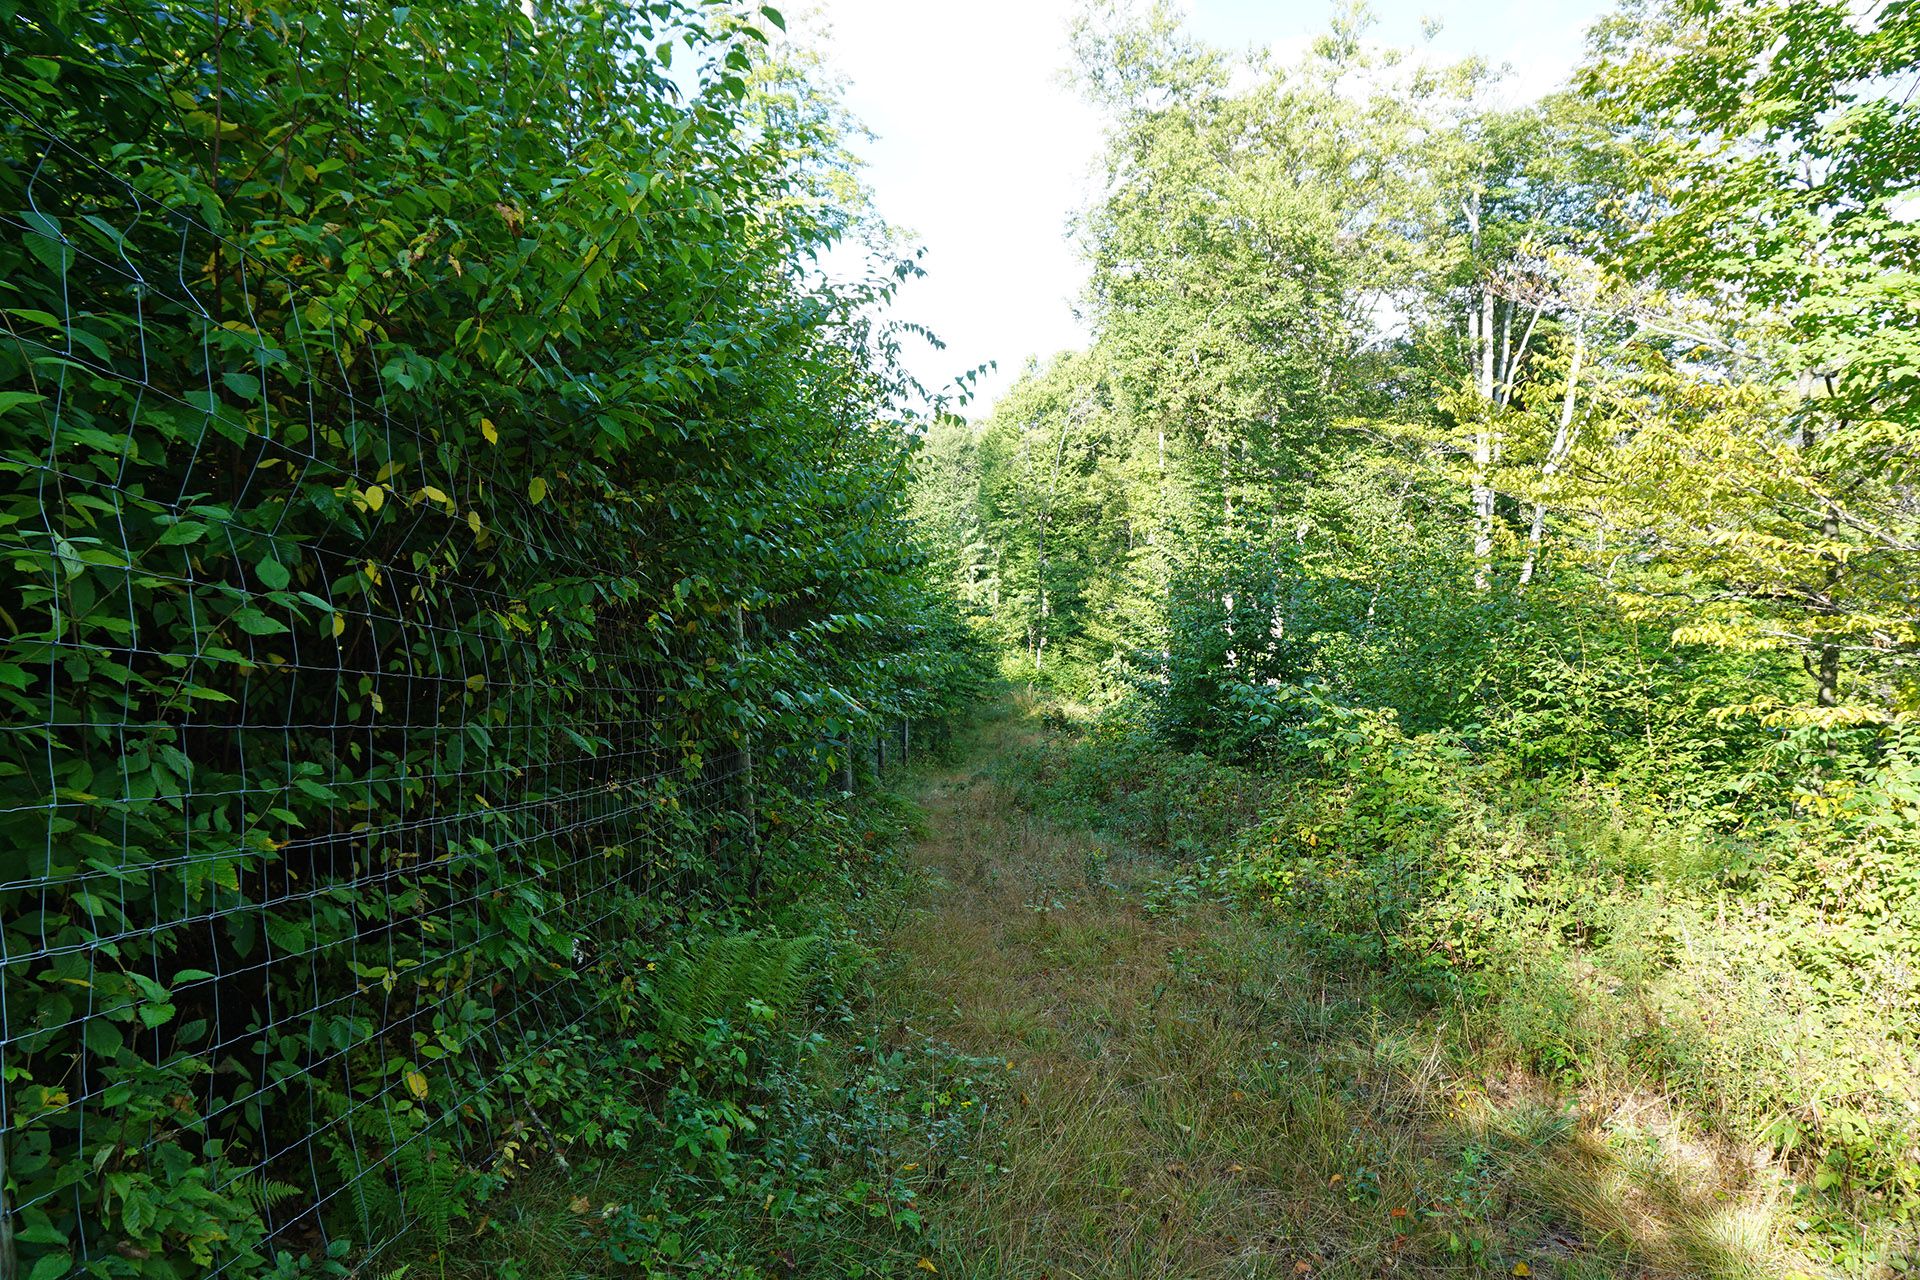 Protect Native Plants with a Deer Fence